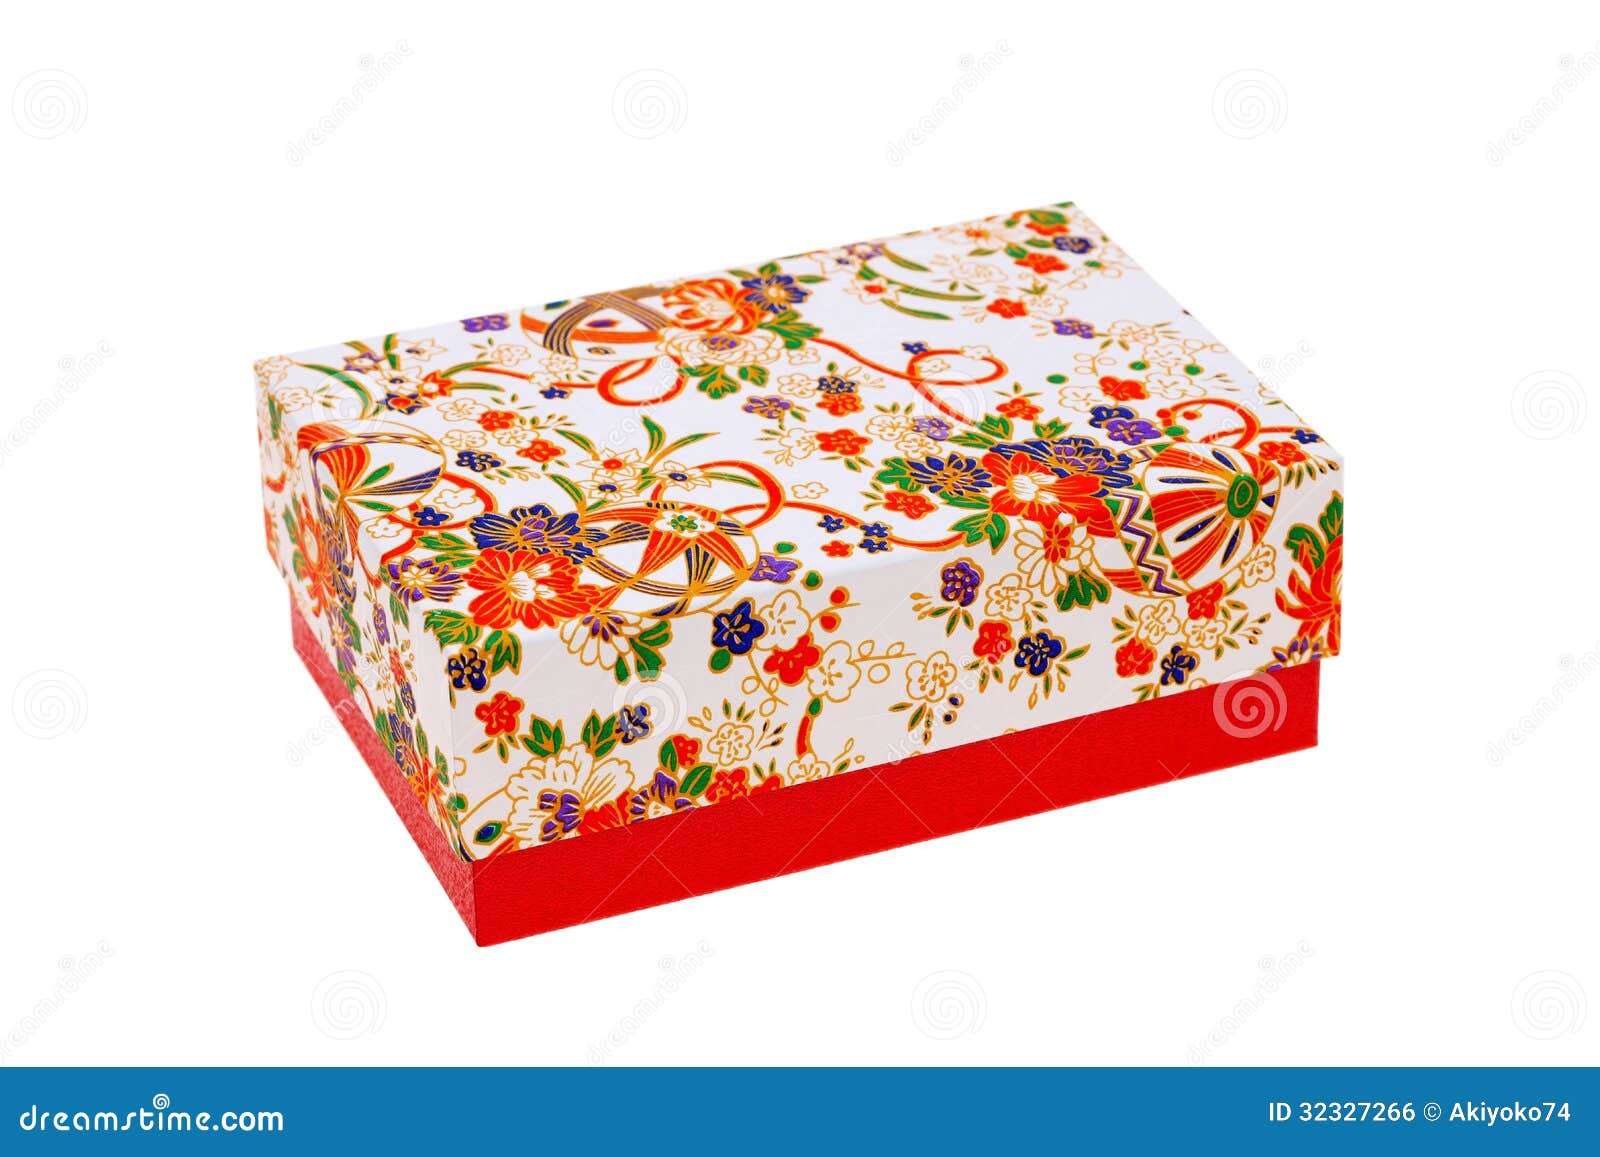 Gift Box Of Japanese Pattern Stock Photo Image of packaging, ornament 32327266